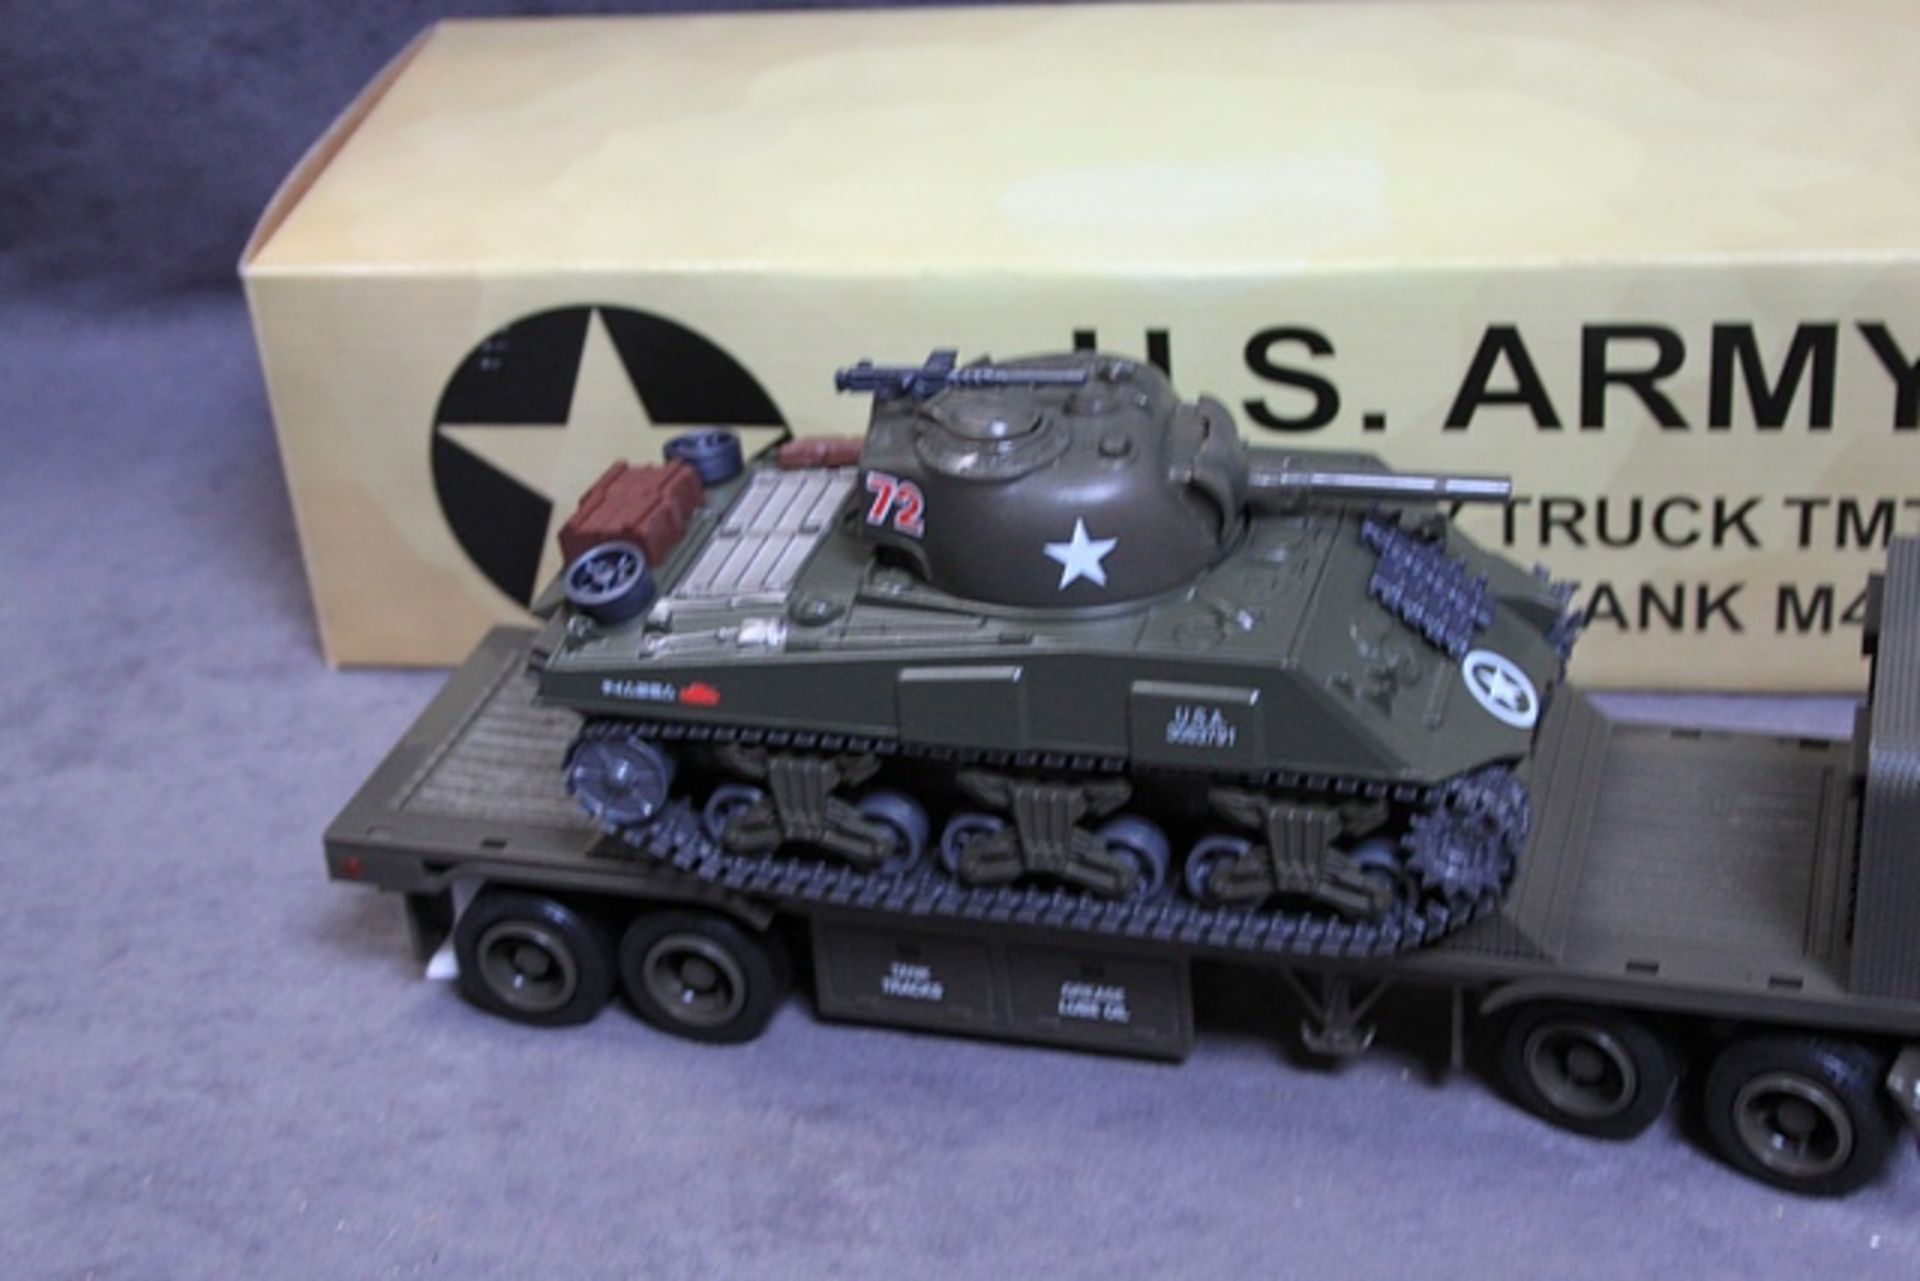 TMT Taylor Trucks (USA) Military U.S. Army Sherman Tank M4a3 With Transport Truck Taylor Tmt-18420 - Image 3 of 4